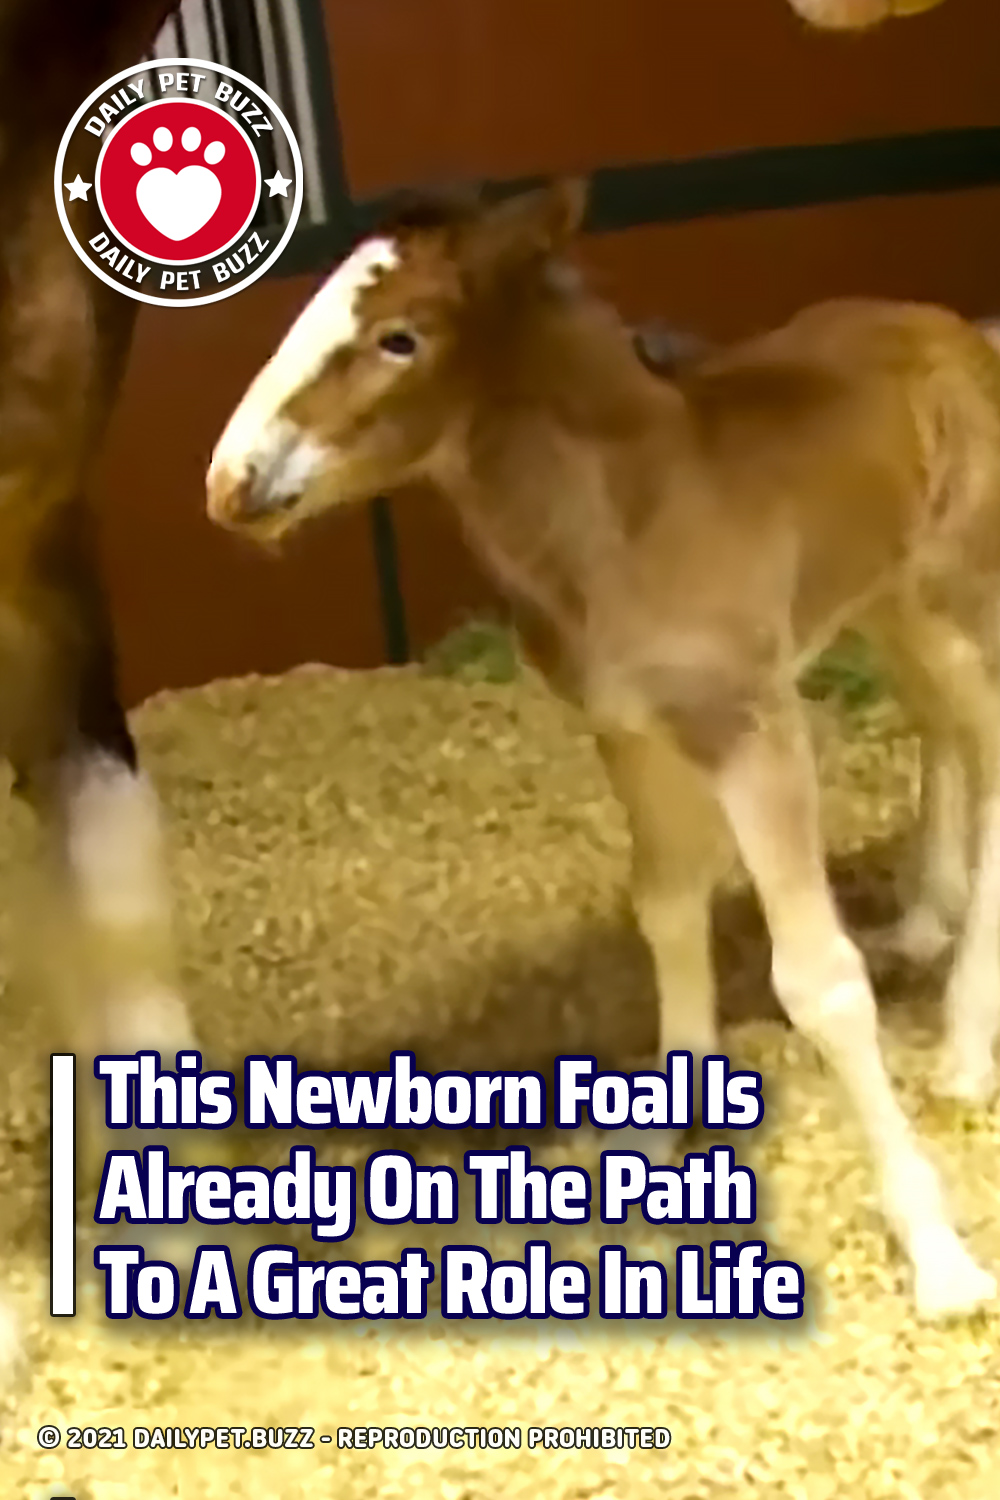 This Newborn Foal Is Already On The Path To A Great Role In Life